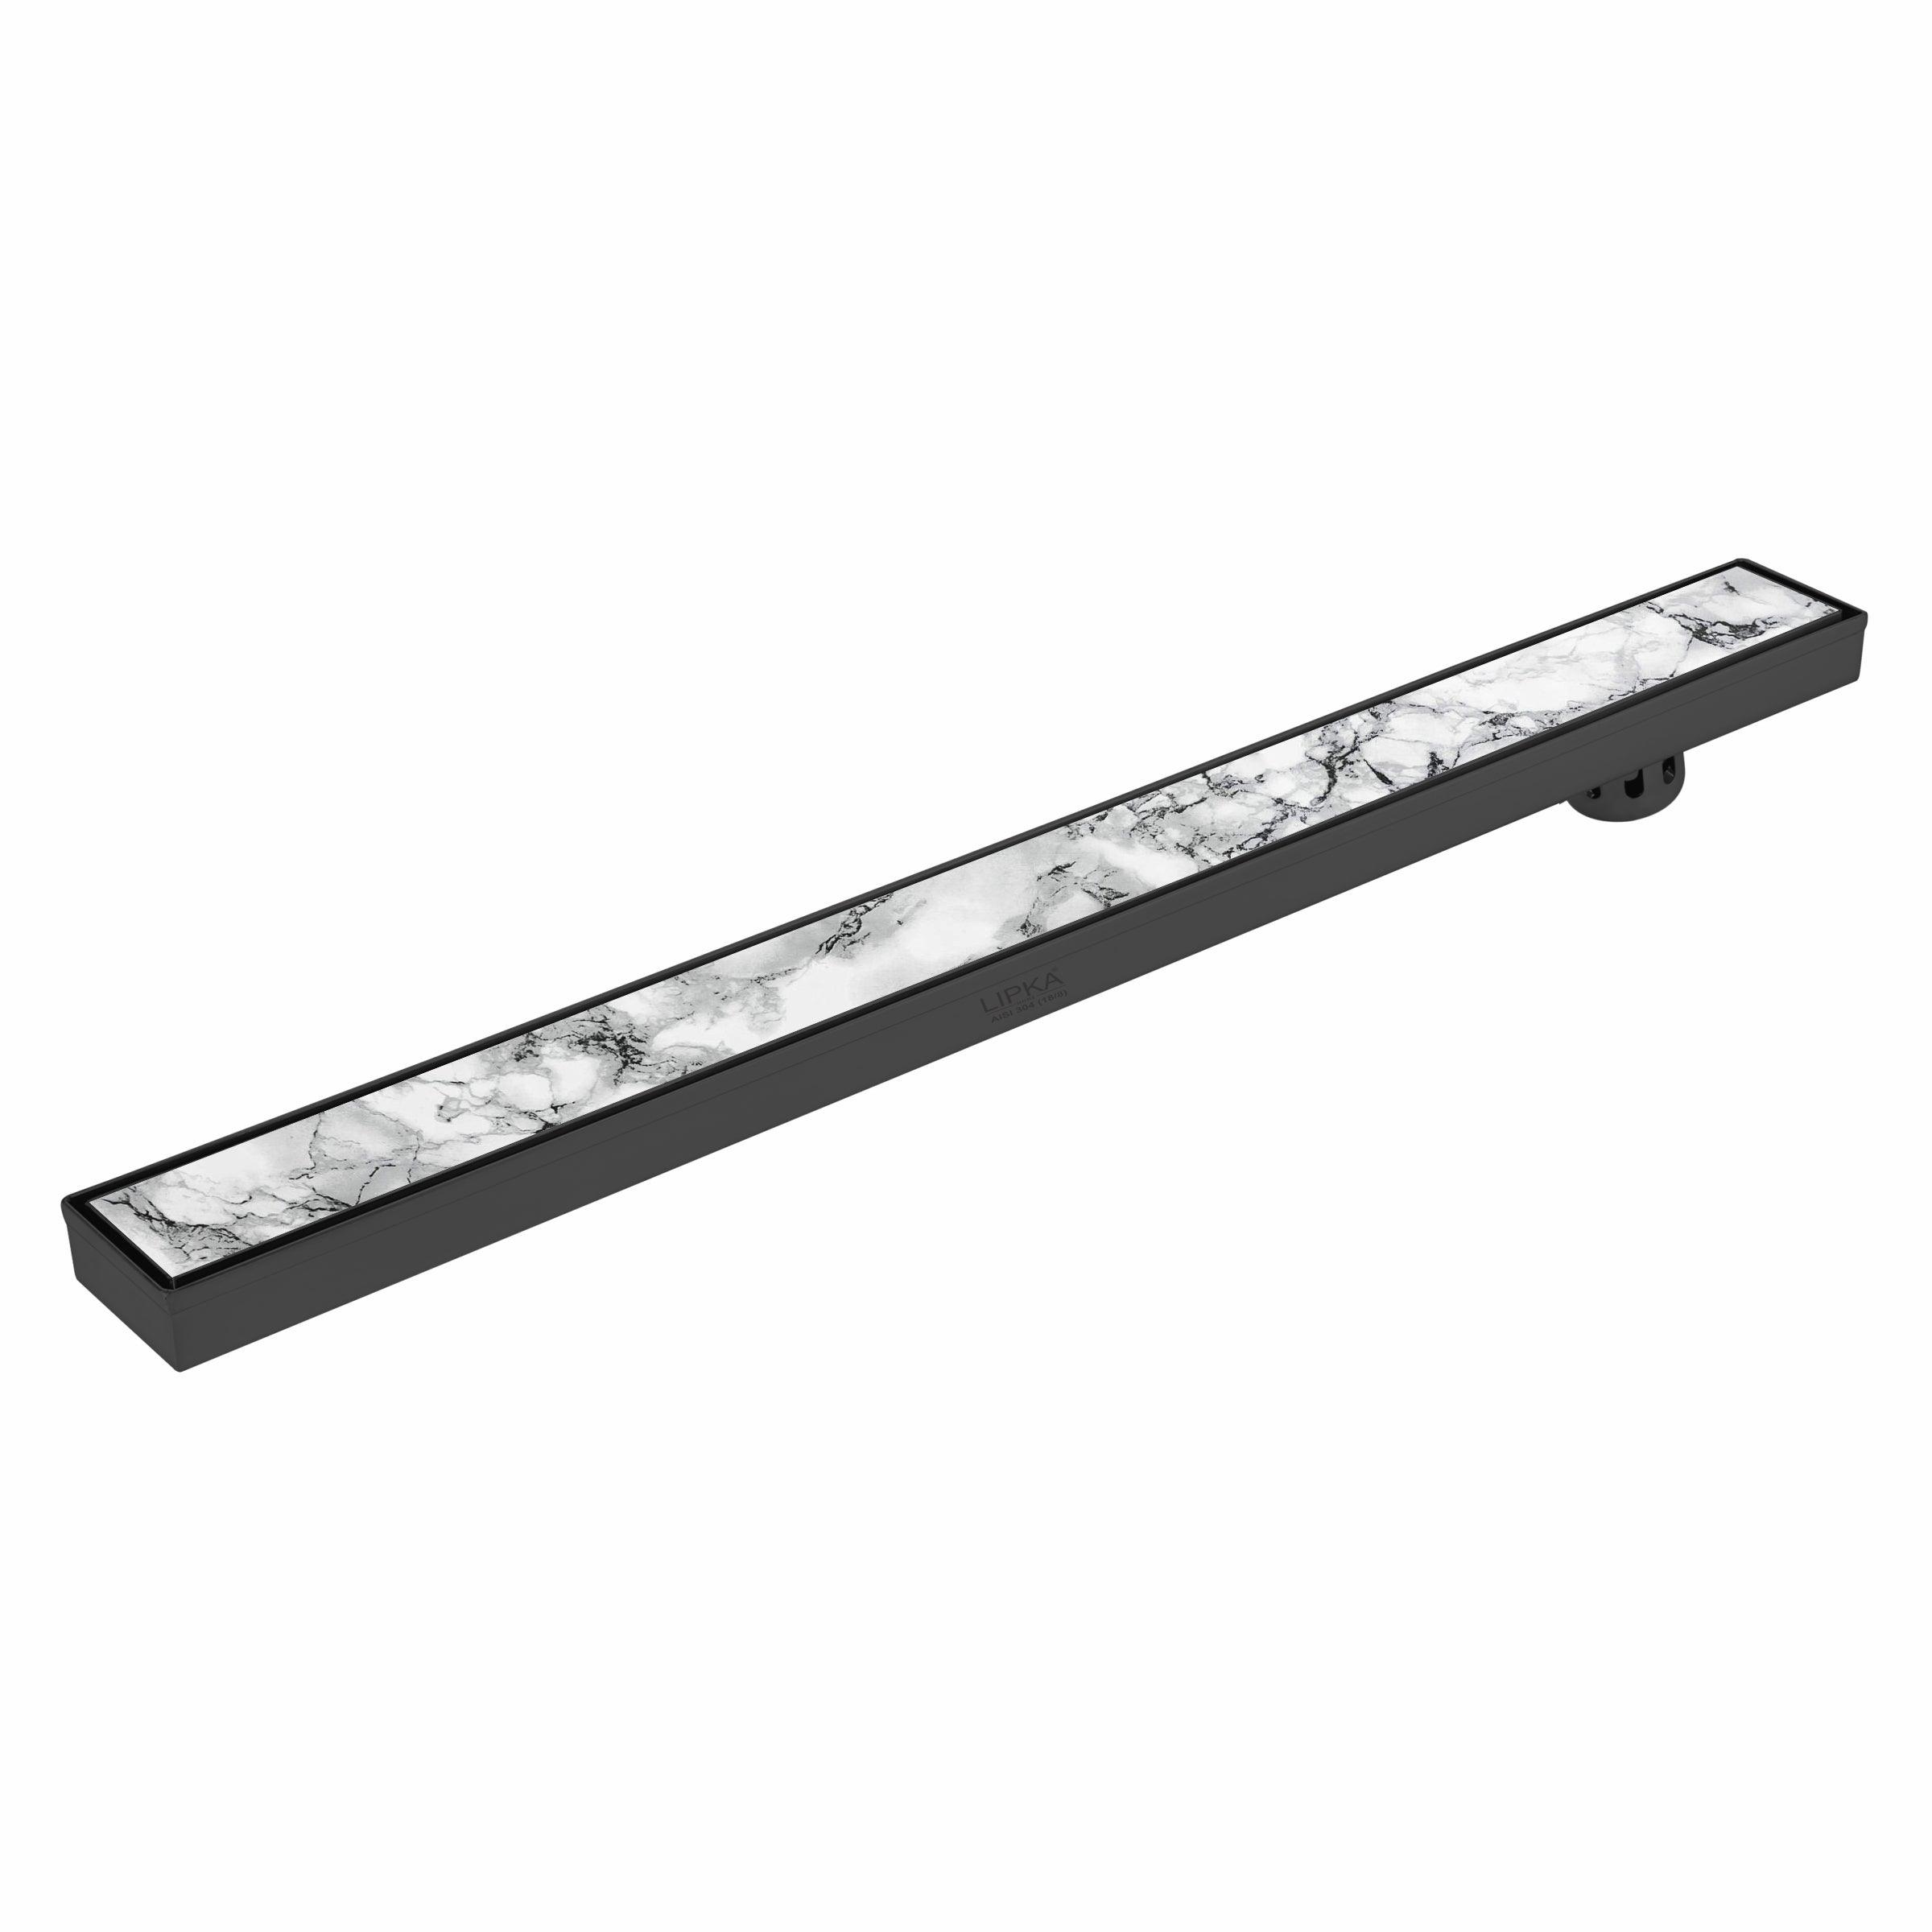 Marble Insert Shower Drain Channel - Black (36 x 3 Inches)